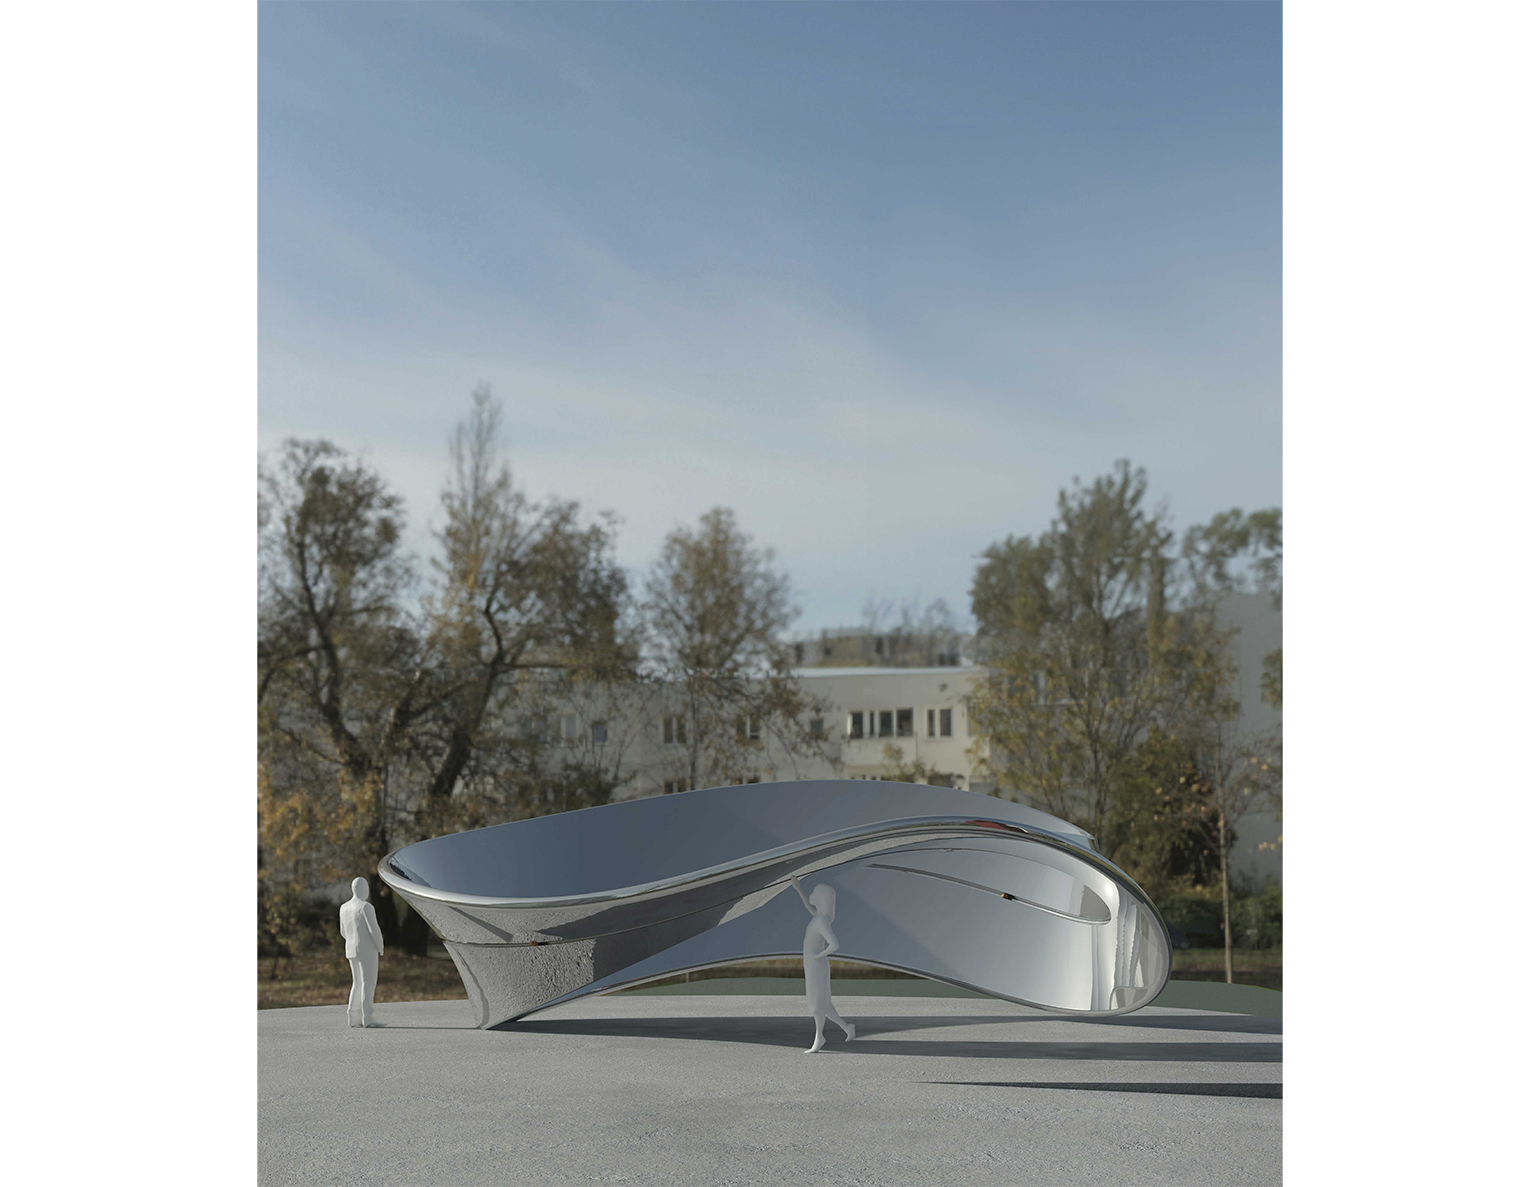 A futuristic structure with a curved design and two figures standing nearby in an outdoor setting.